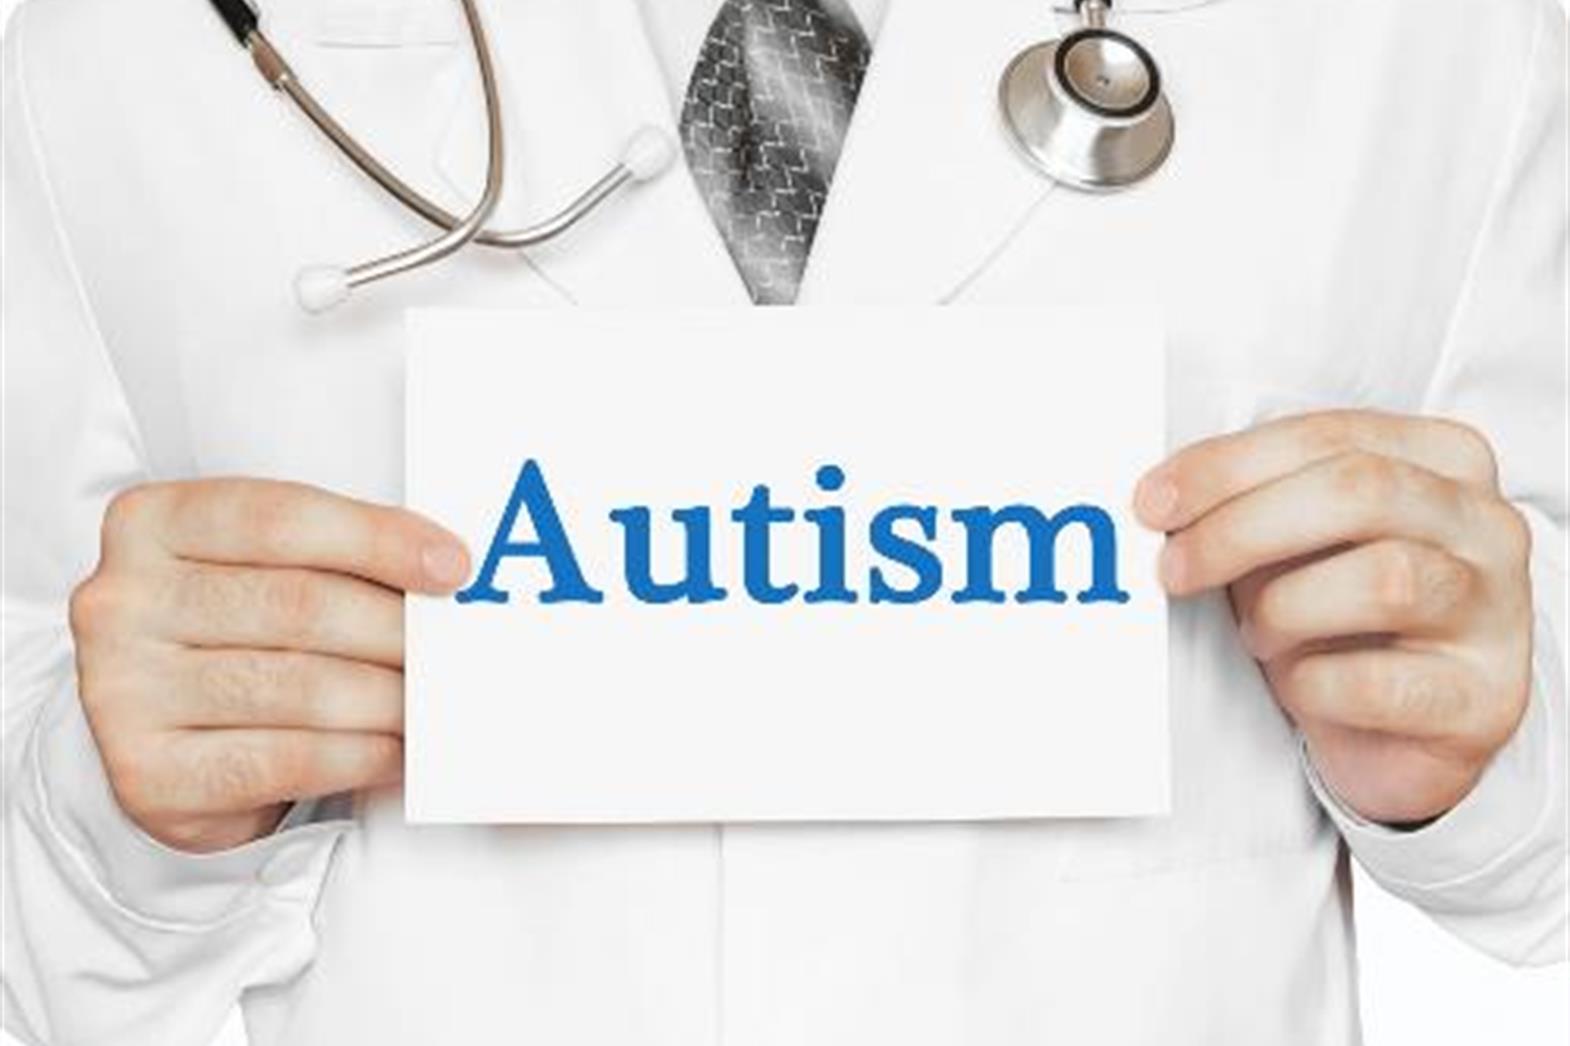 a person in a white lab coat wearing a stethoscope holding a sign that reads "autism"  